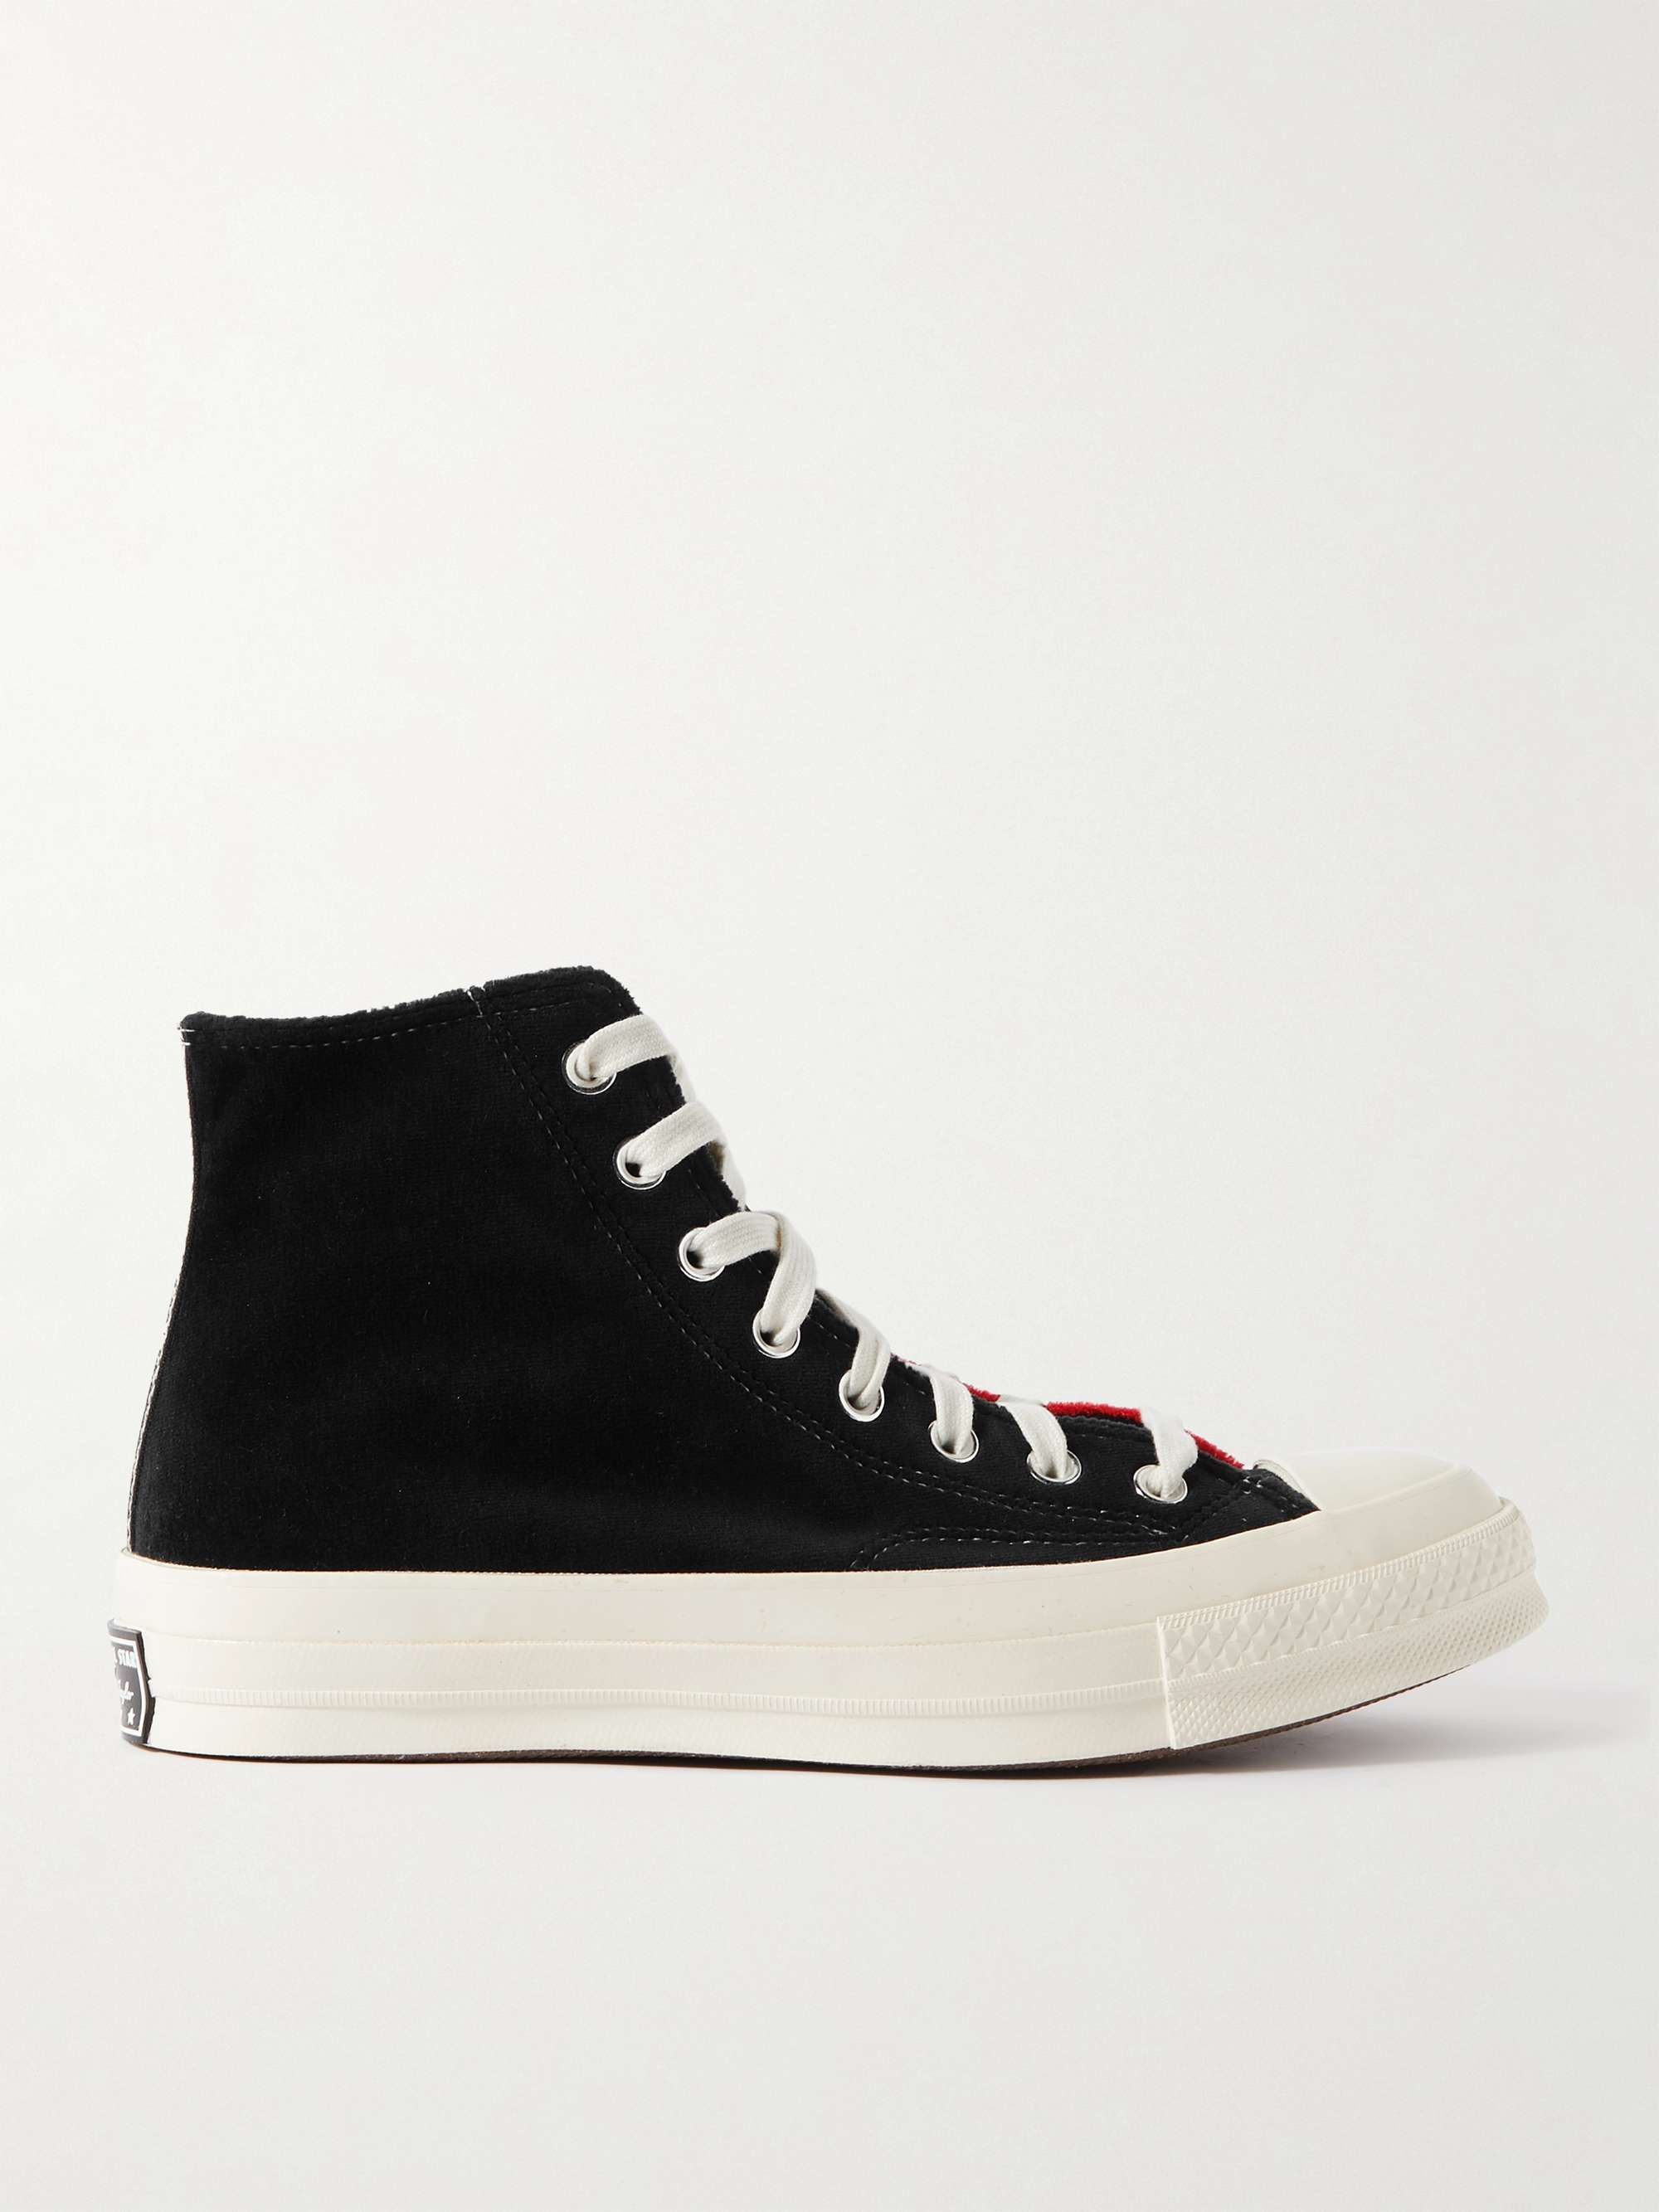 CONVERSE + Beyond Retro Chuck 70 Upcycled Two-Tone Velvet High-Top Sneakers  | MR PORTER